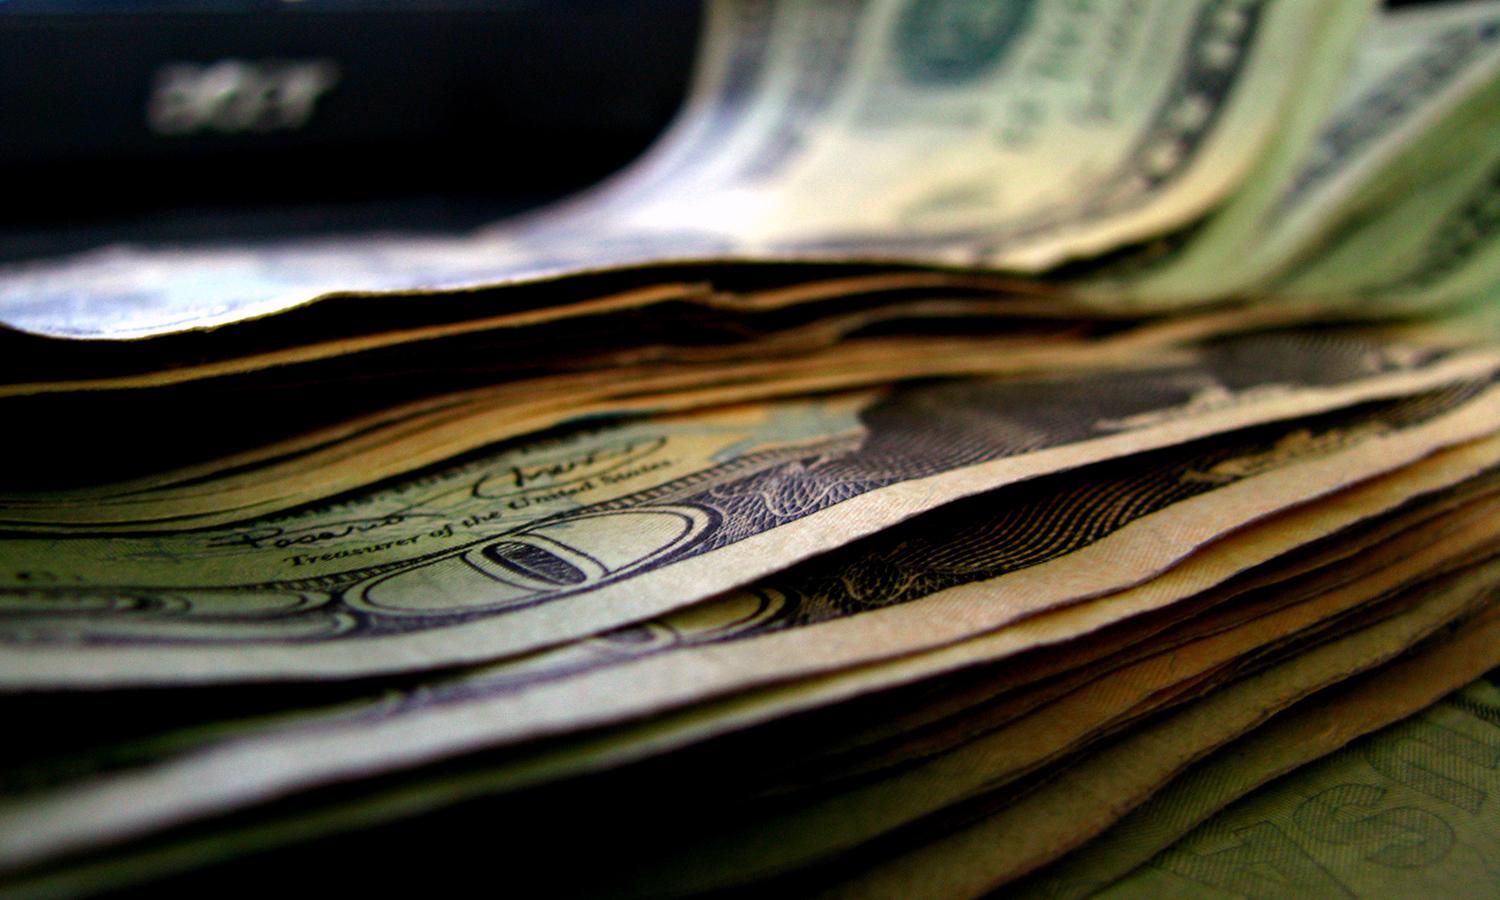 A close-up view of a stack of U.S. currency.